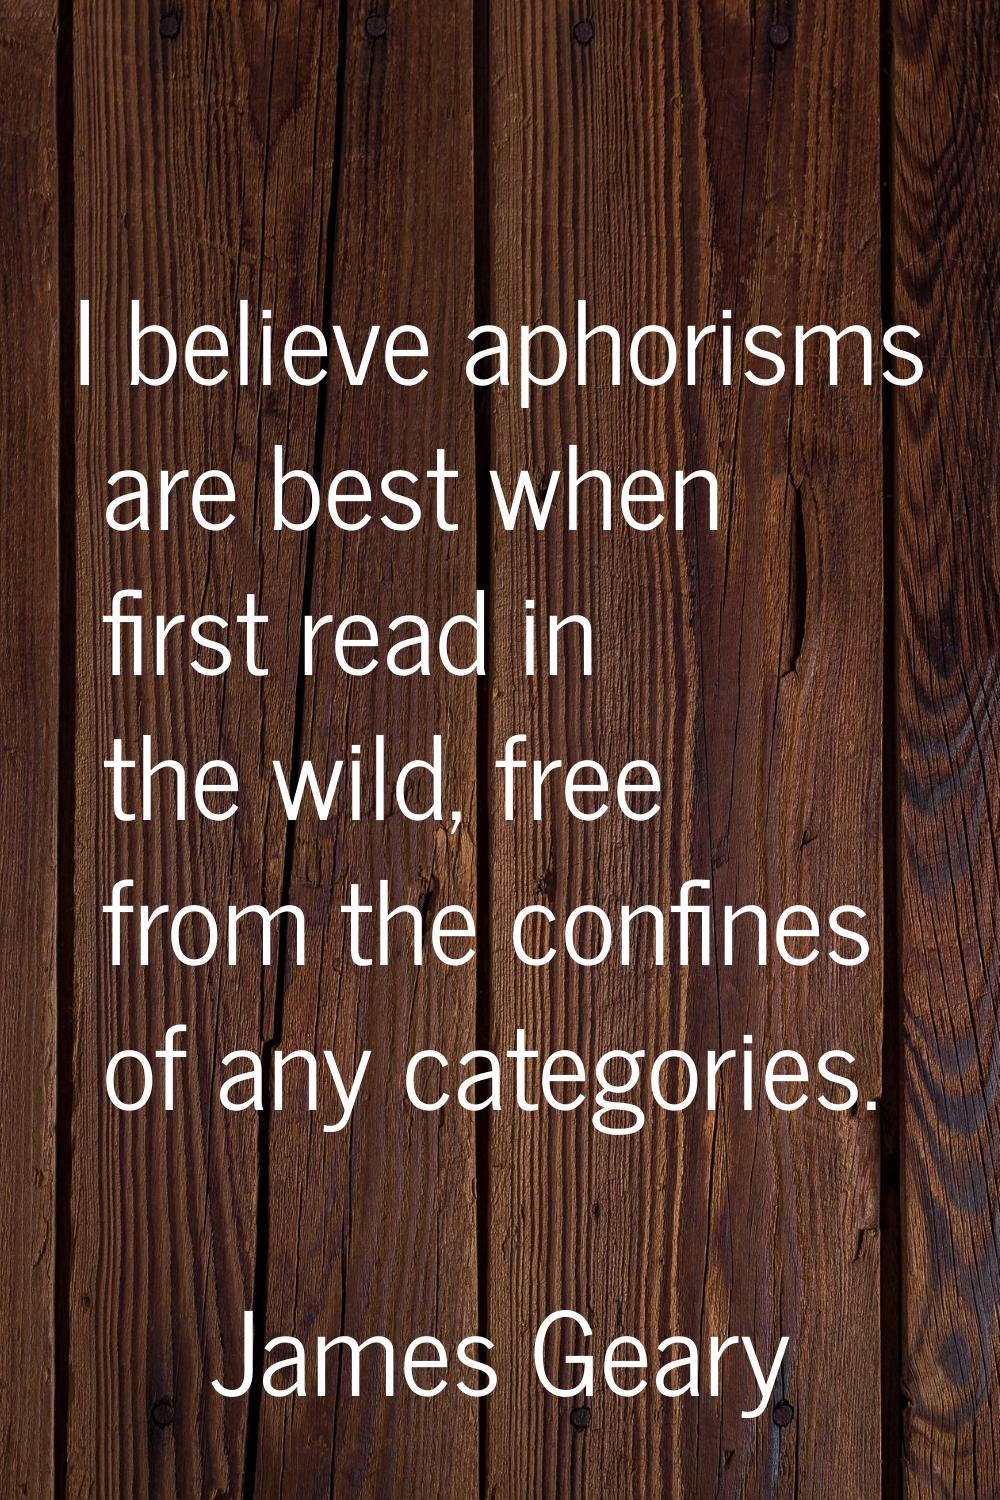 I believe aphorisms are best when first read in the wild, free from the confines of any categories.